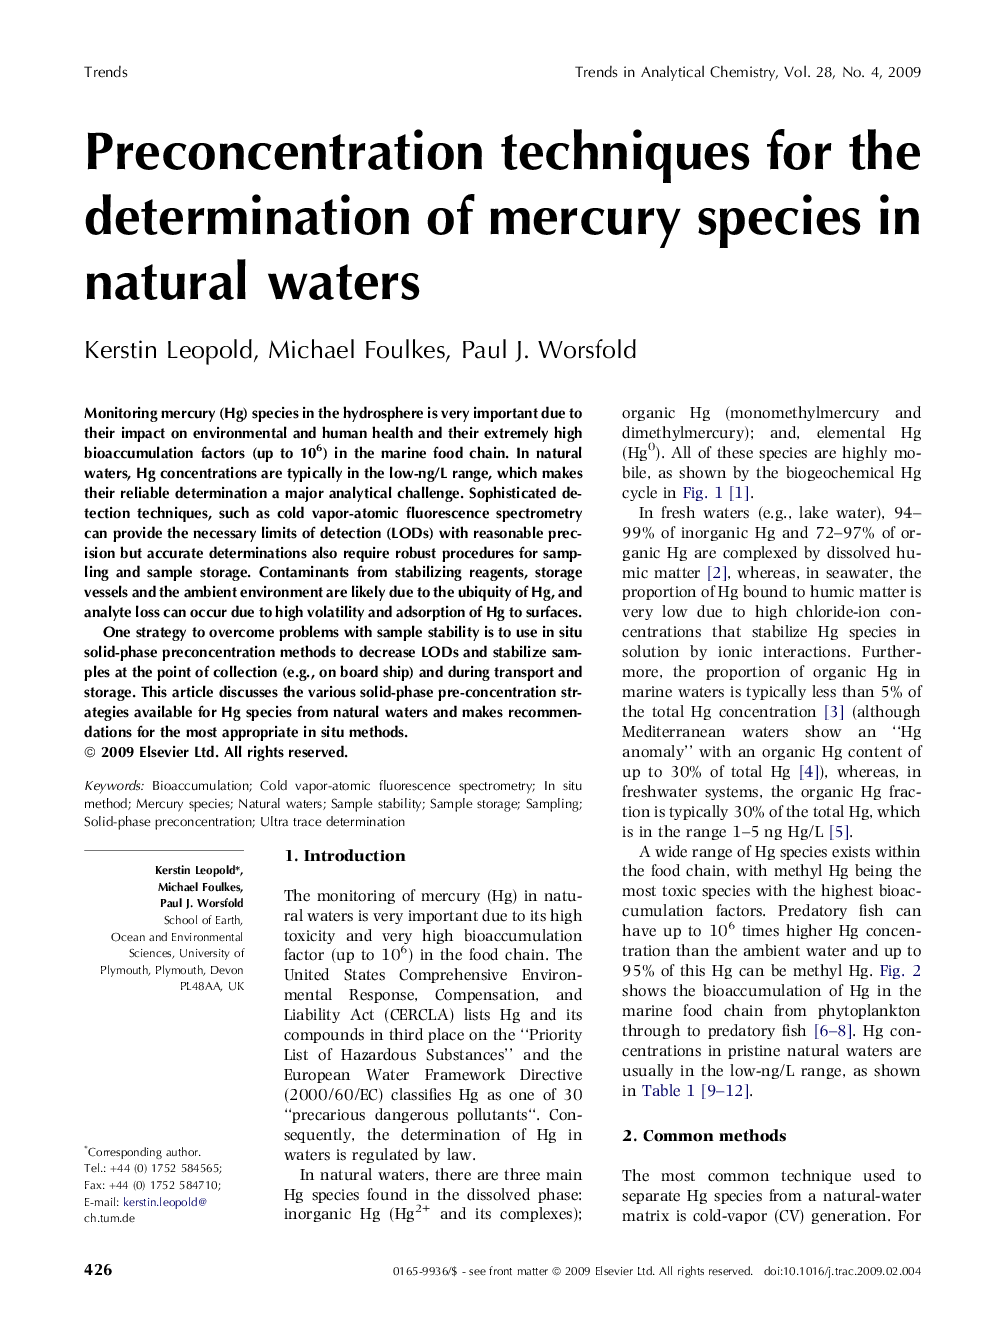 Preconcentration techniques for the determination of mercury species in natural waters